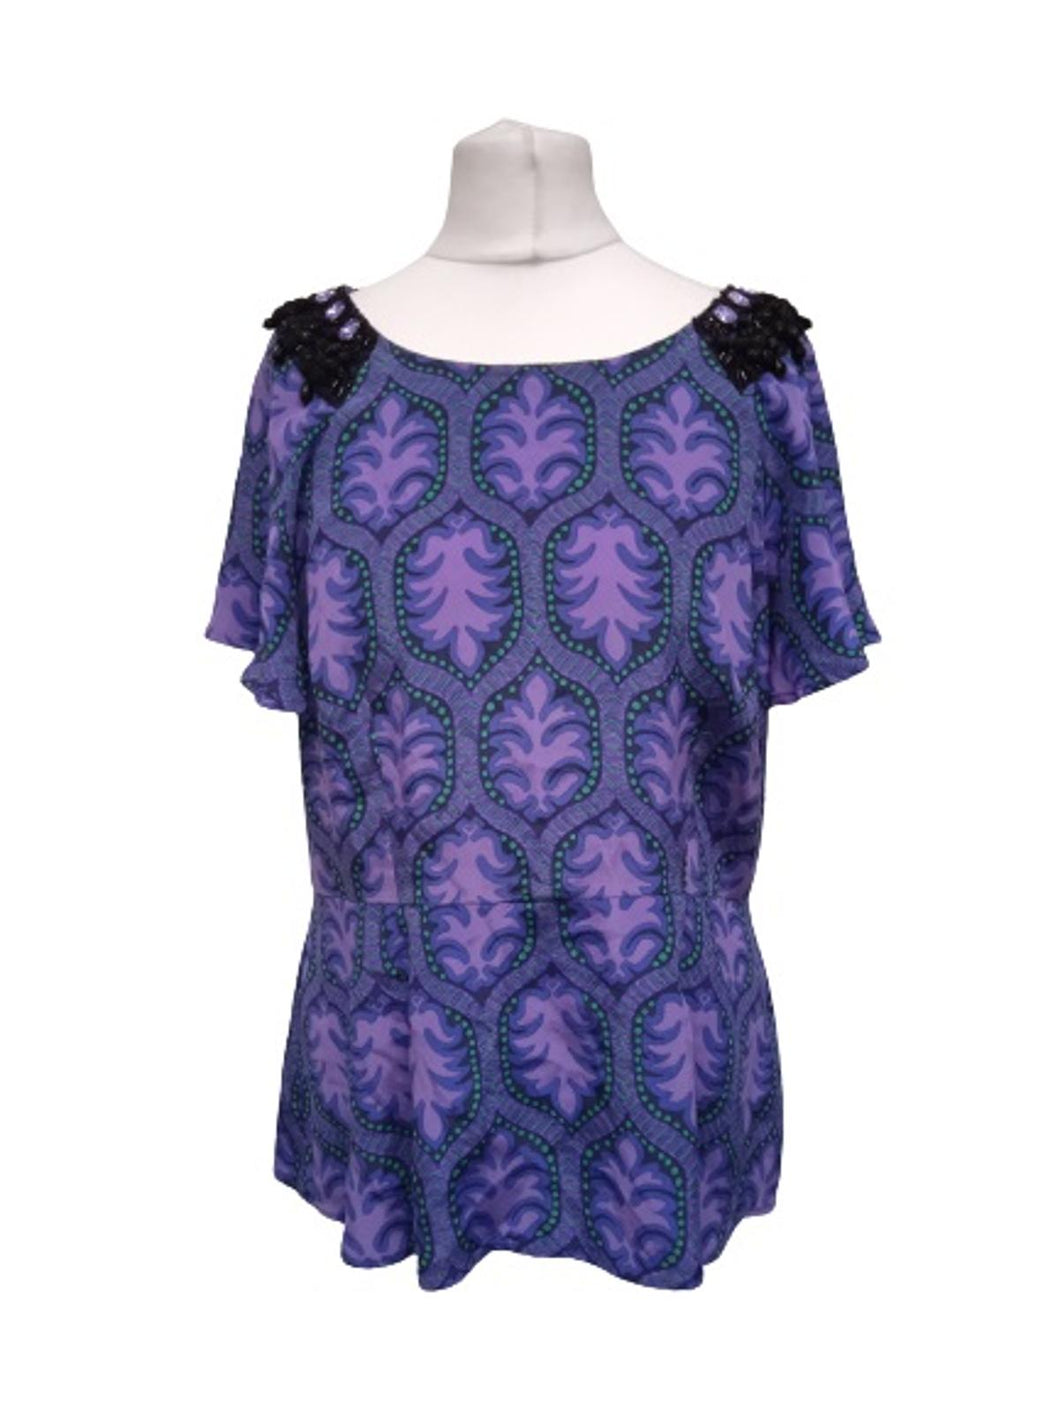 TRACY RESSE Ladies Purple & Green Silk Short Sleeve Embellished Top Size M